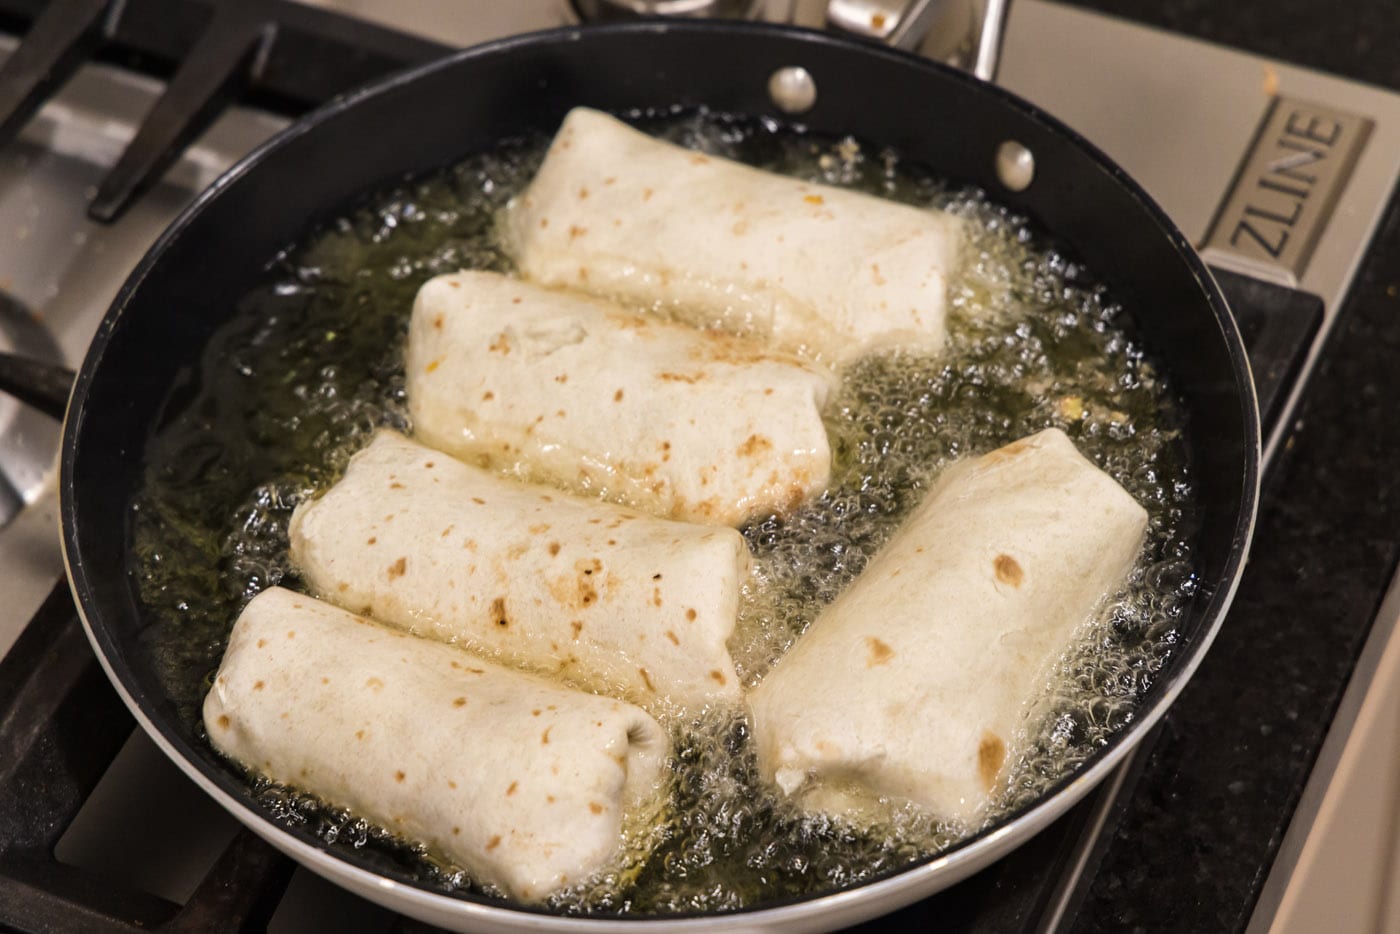 deep frying chimichangas in a skillet